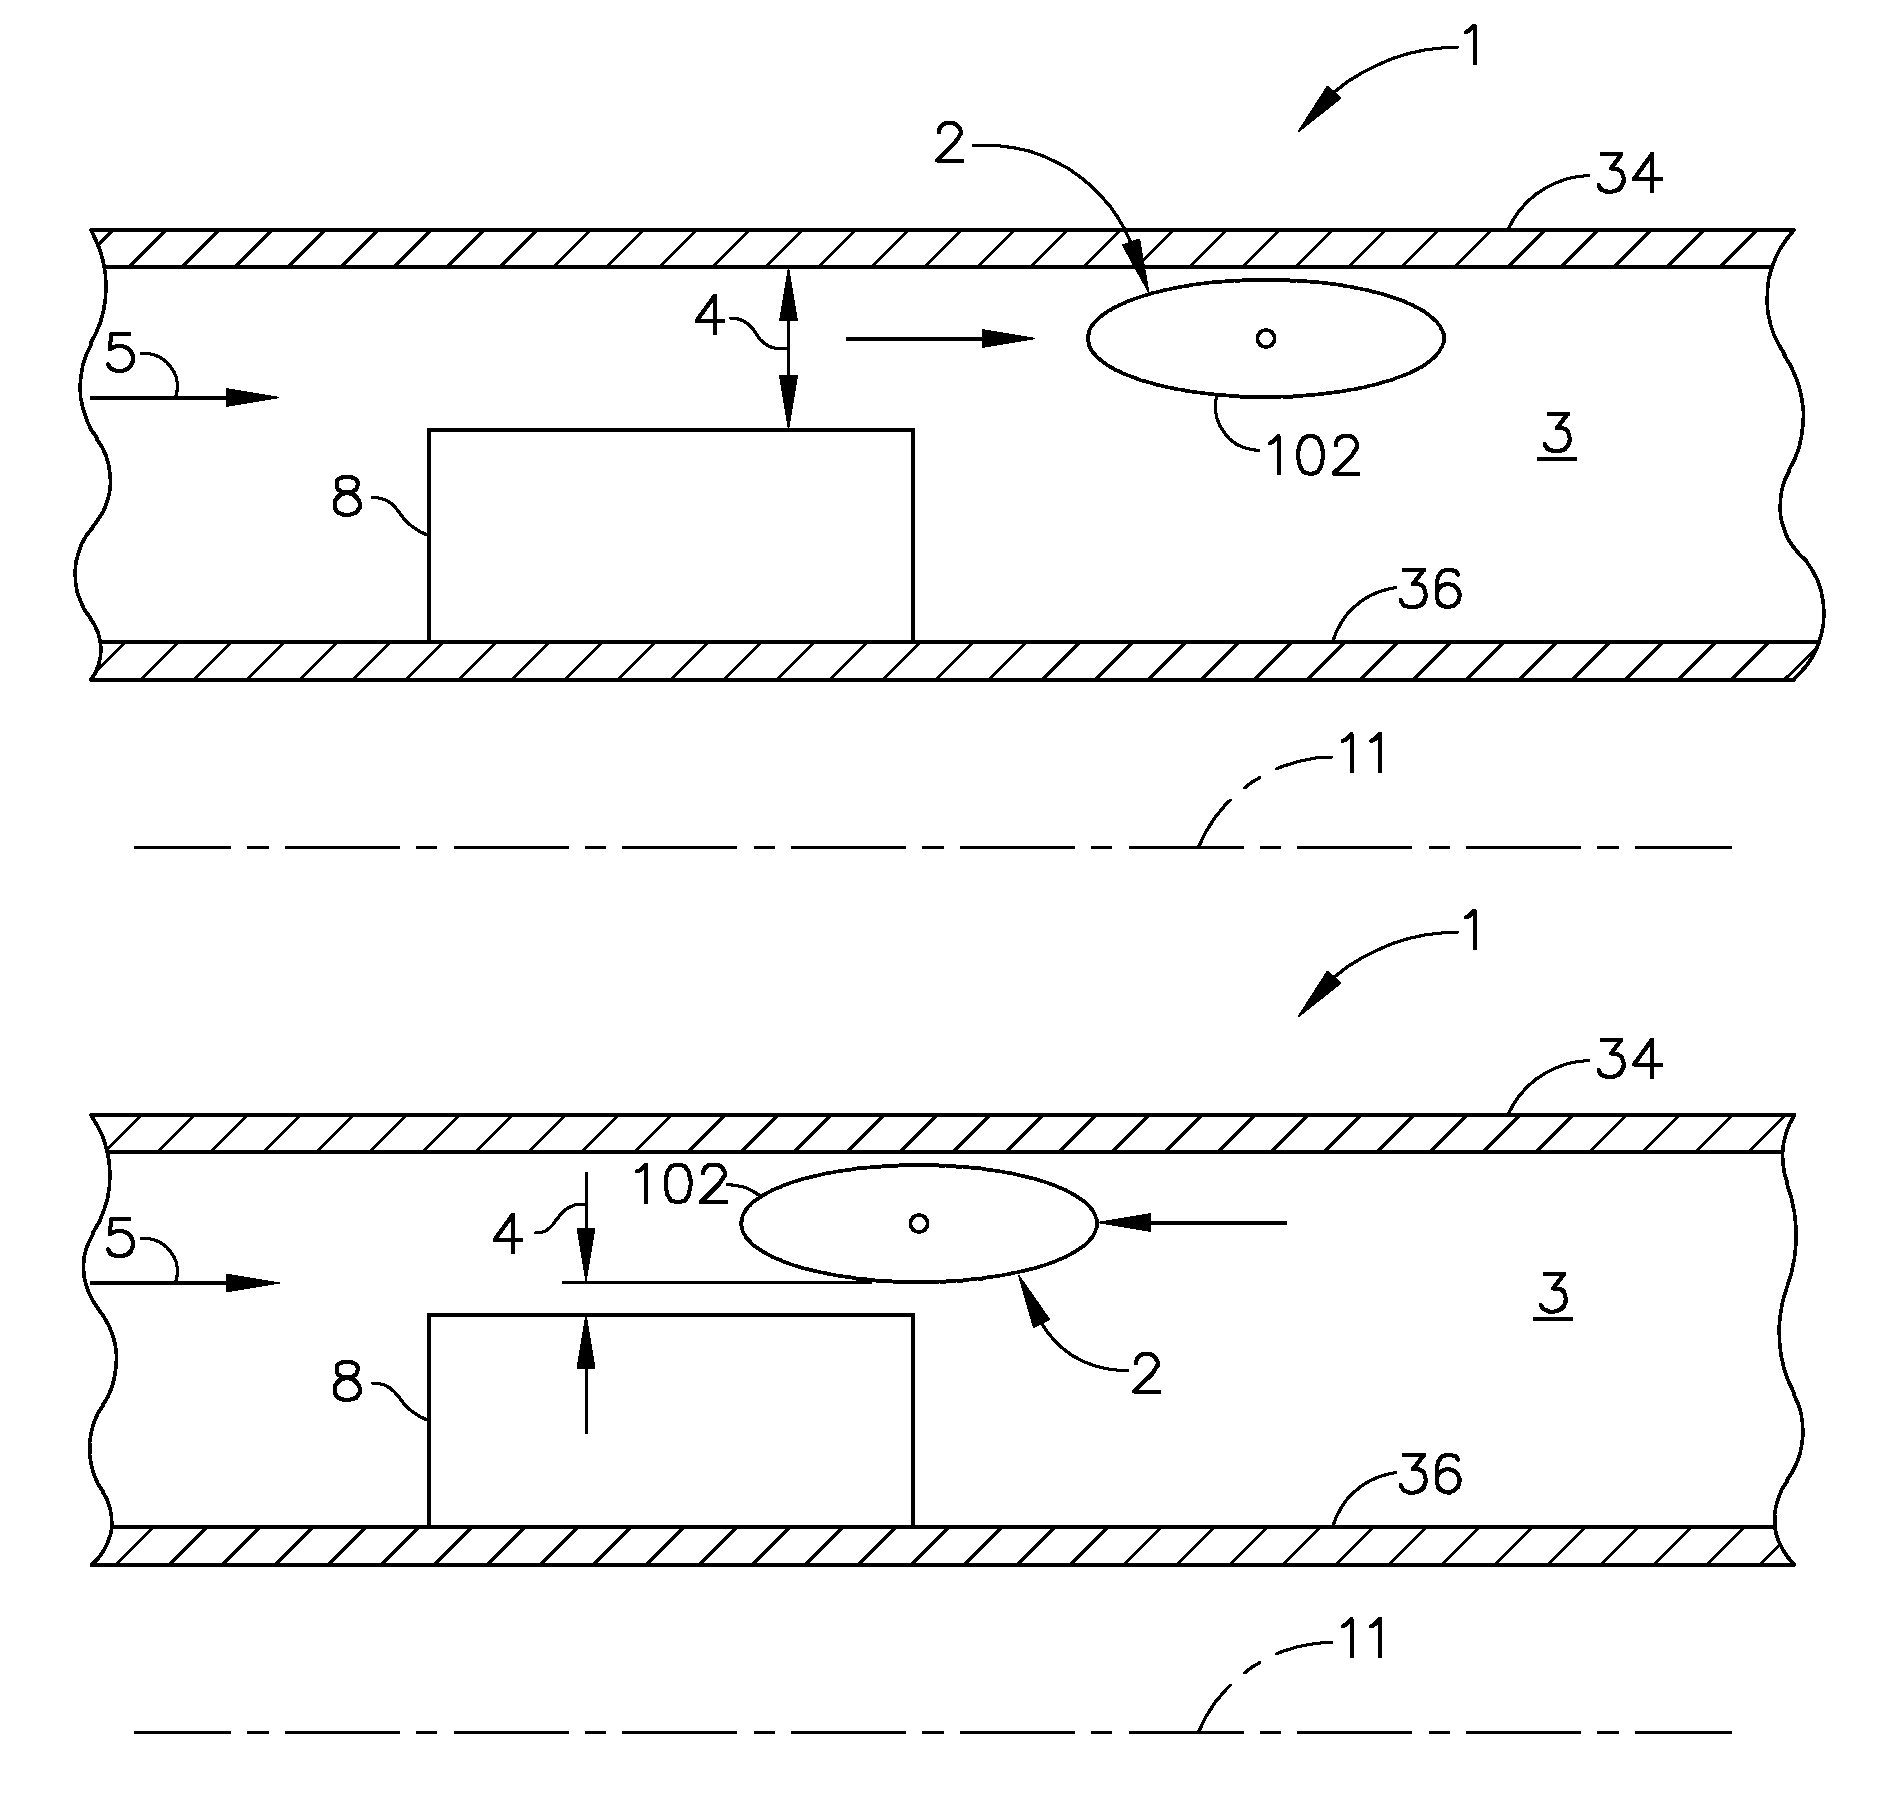 Integrated variable geometry flow restrictor and heat exchanger